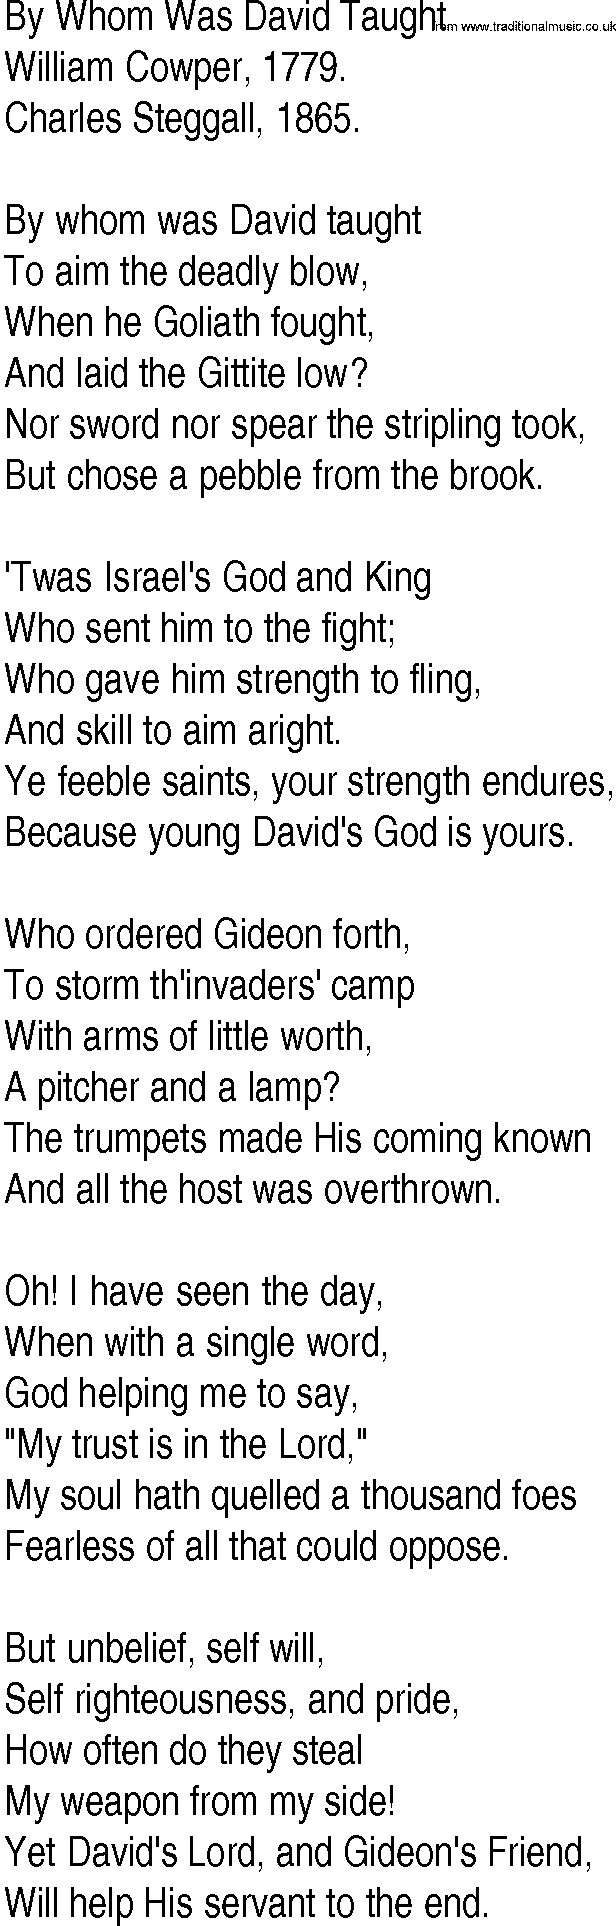 Hymn and Gospel Song: By Whom Was David Taught by William Cowper lyrics